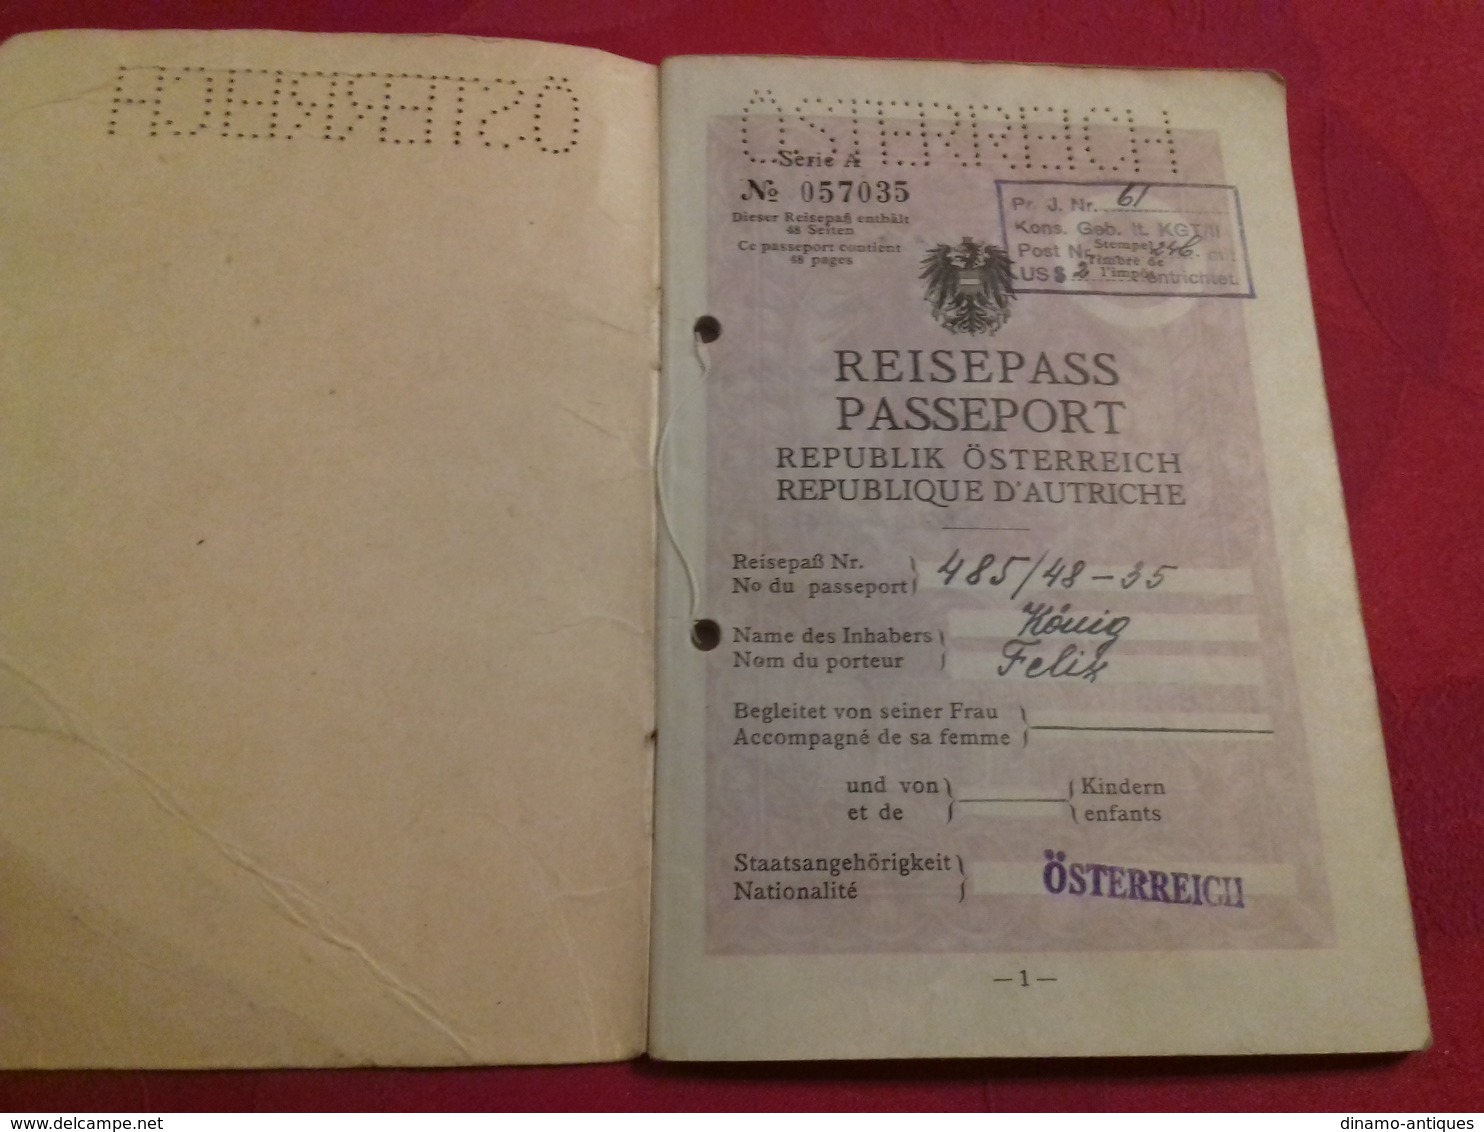 1948 Austria Passport Passeport Reisepass Issued In Shanghai China  For A Jewish Immigrant For His Travel Back Home - Historische Dokumente